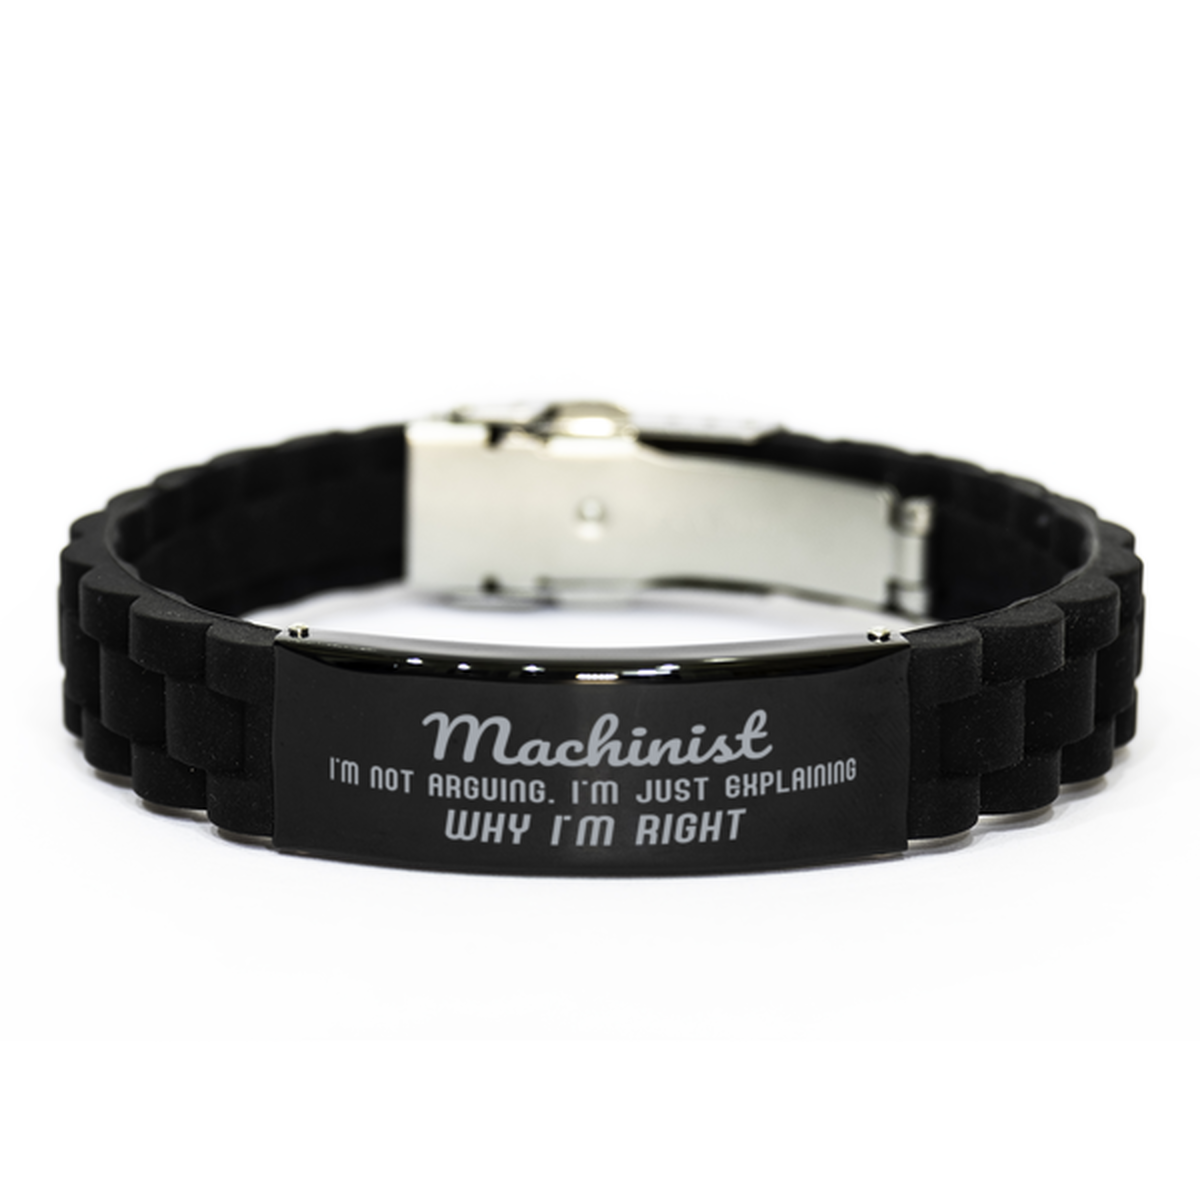 Machinist I'm not Arguing. I'm Just Explaining Why I'm RIGHT Black Glidelock Clasp Bracelet, Funny Saying Quote Machinist Gifts For Machinist Graduation Birthday Christmas Gifts for Men Women Coworker